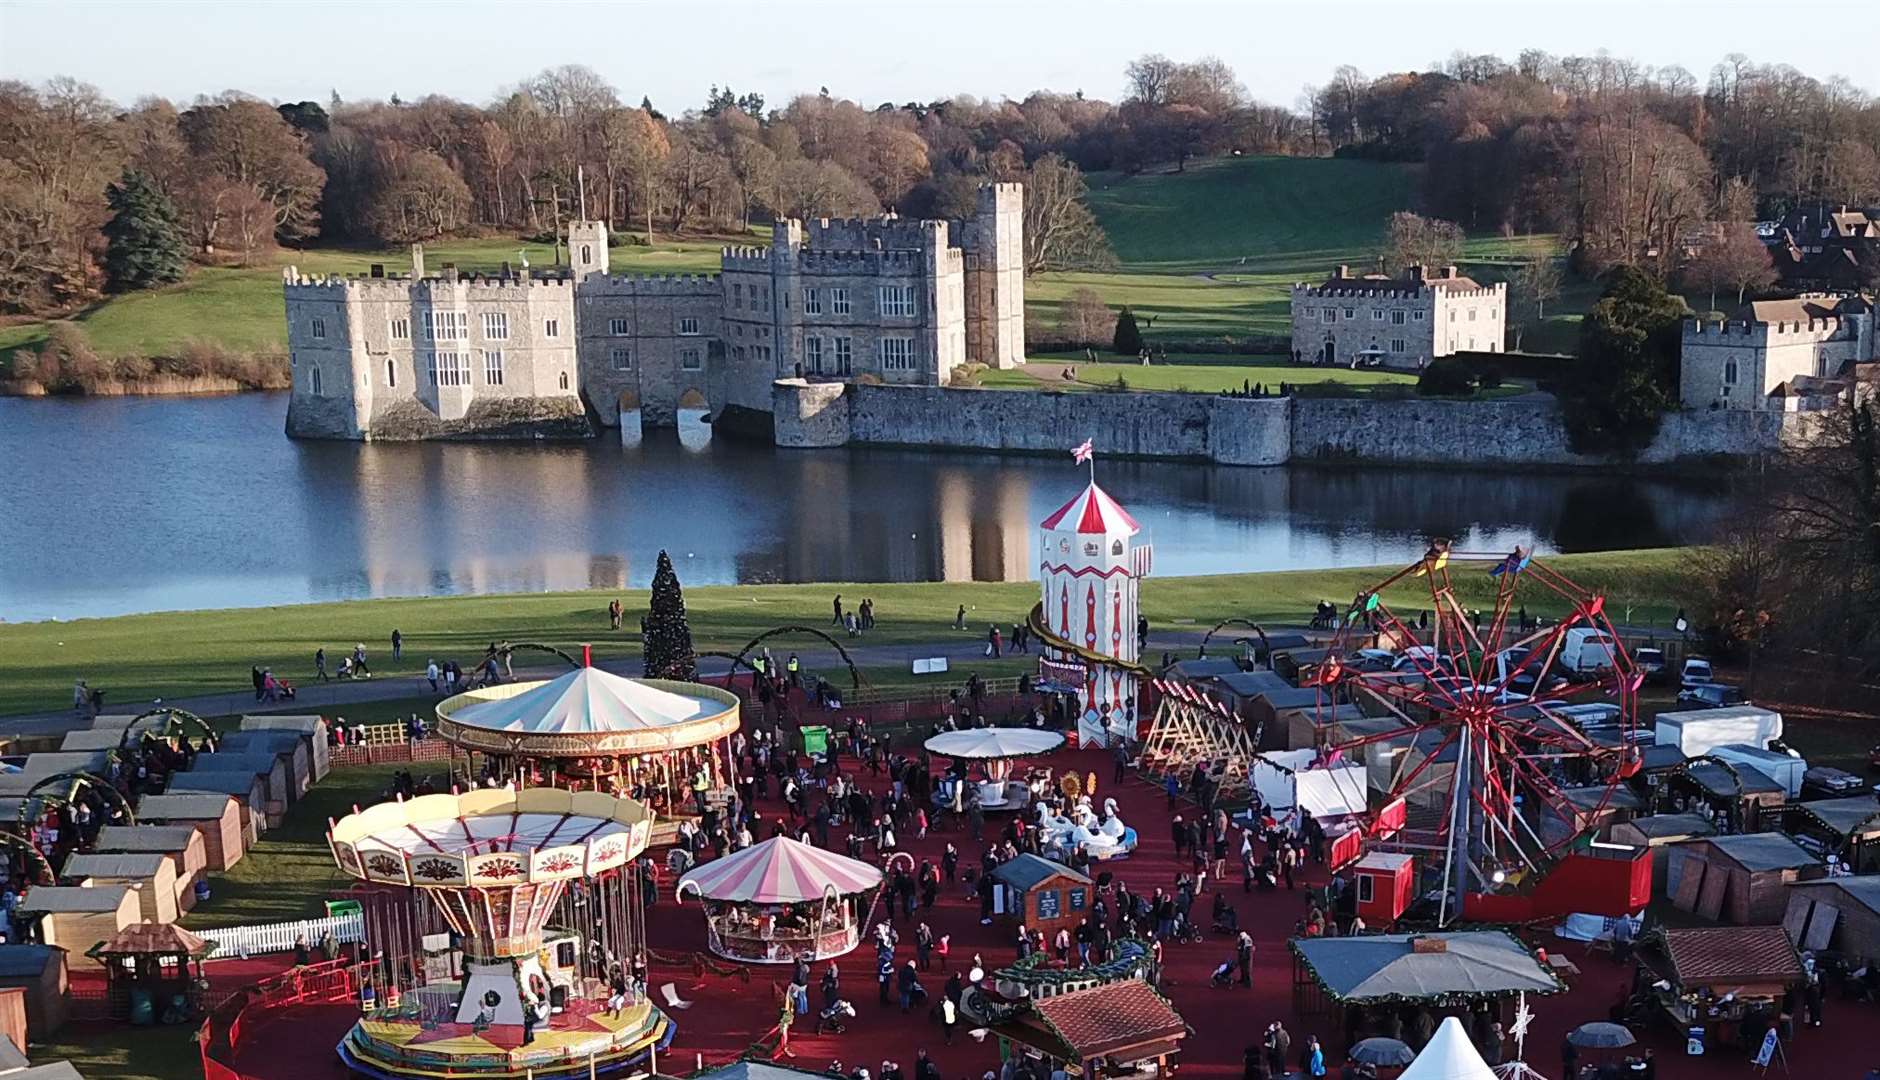 Let your Christmas wishes take flight at Leeds Castle as the beautiful staterooms are transformed into a magical kingdom of birds and festive feathers!